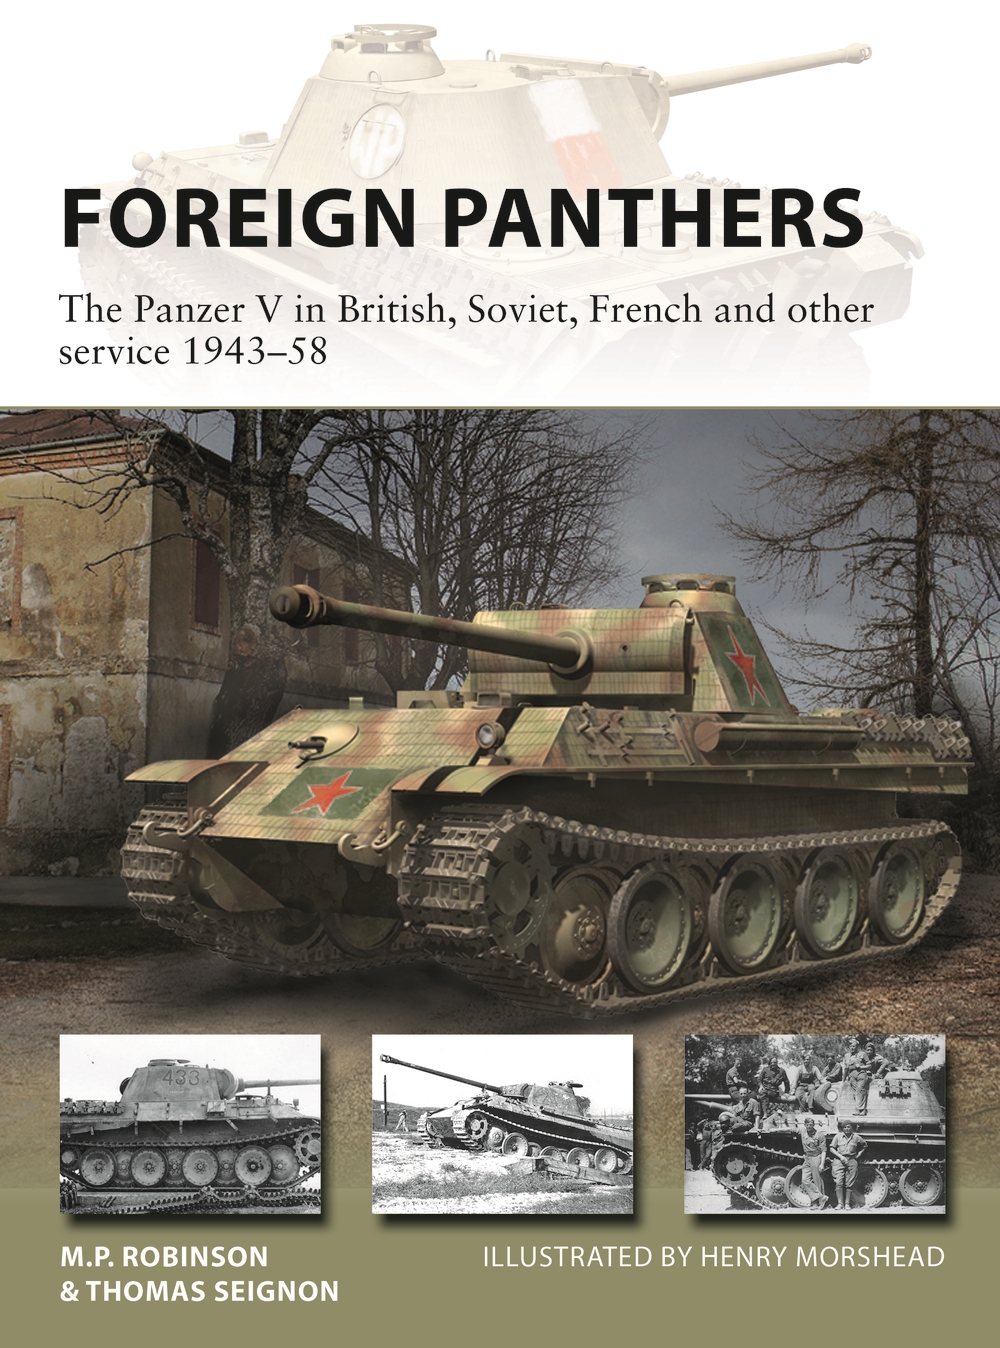 Foreign Panthers book jacket